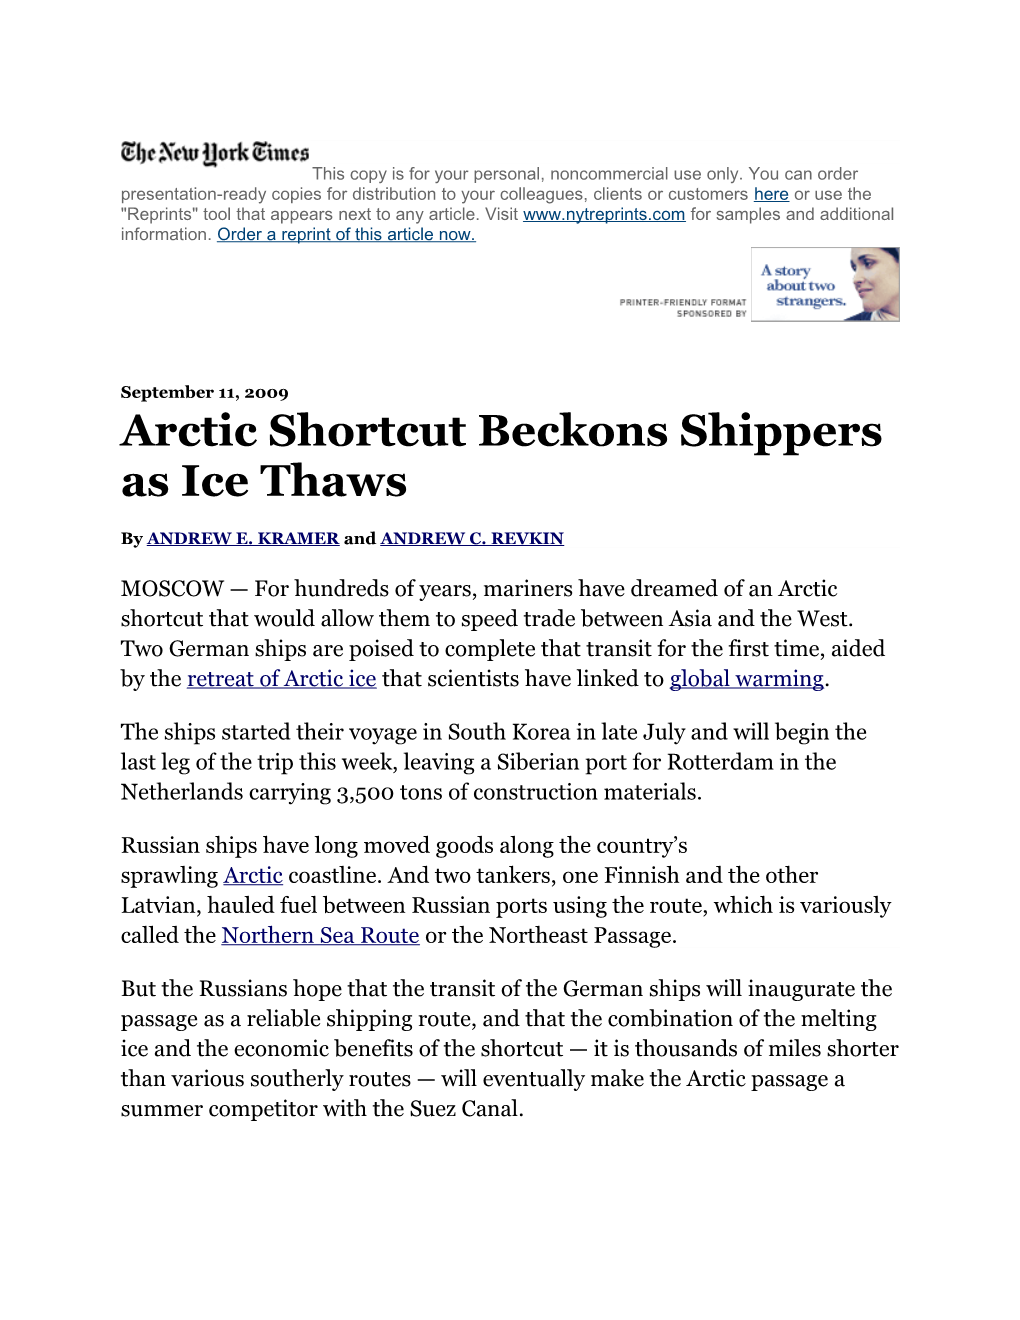 Arctic Shortcut Beckons Shippers As Ice Thaws